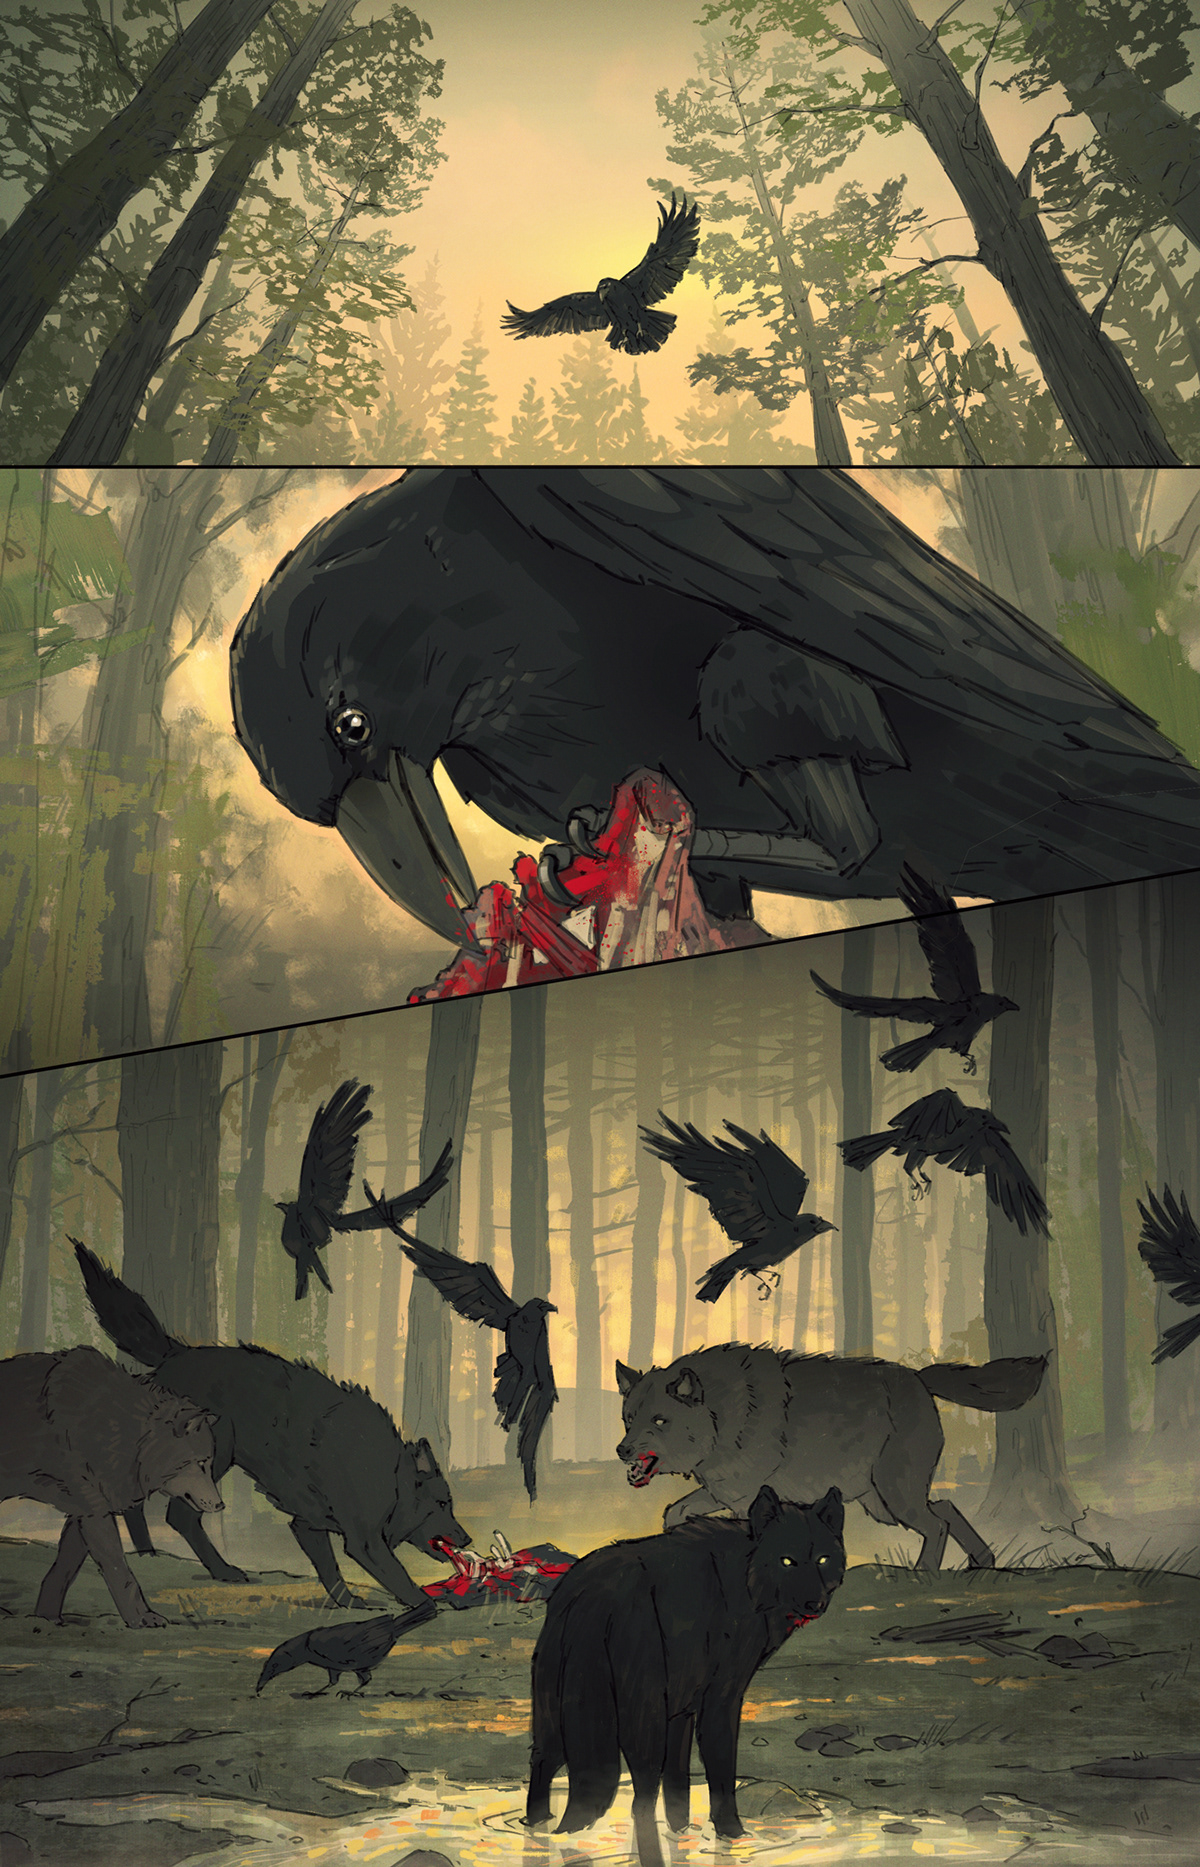 comic Graphic Novel Moody atmospheric animal illustration ILLUSTRATION  nature illustration Drawing  concept art painting  